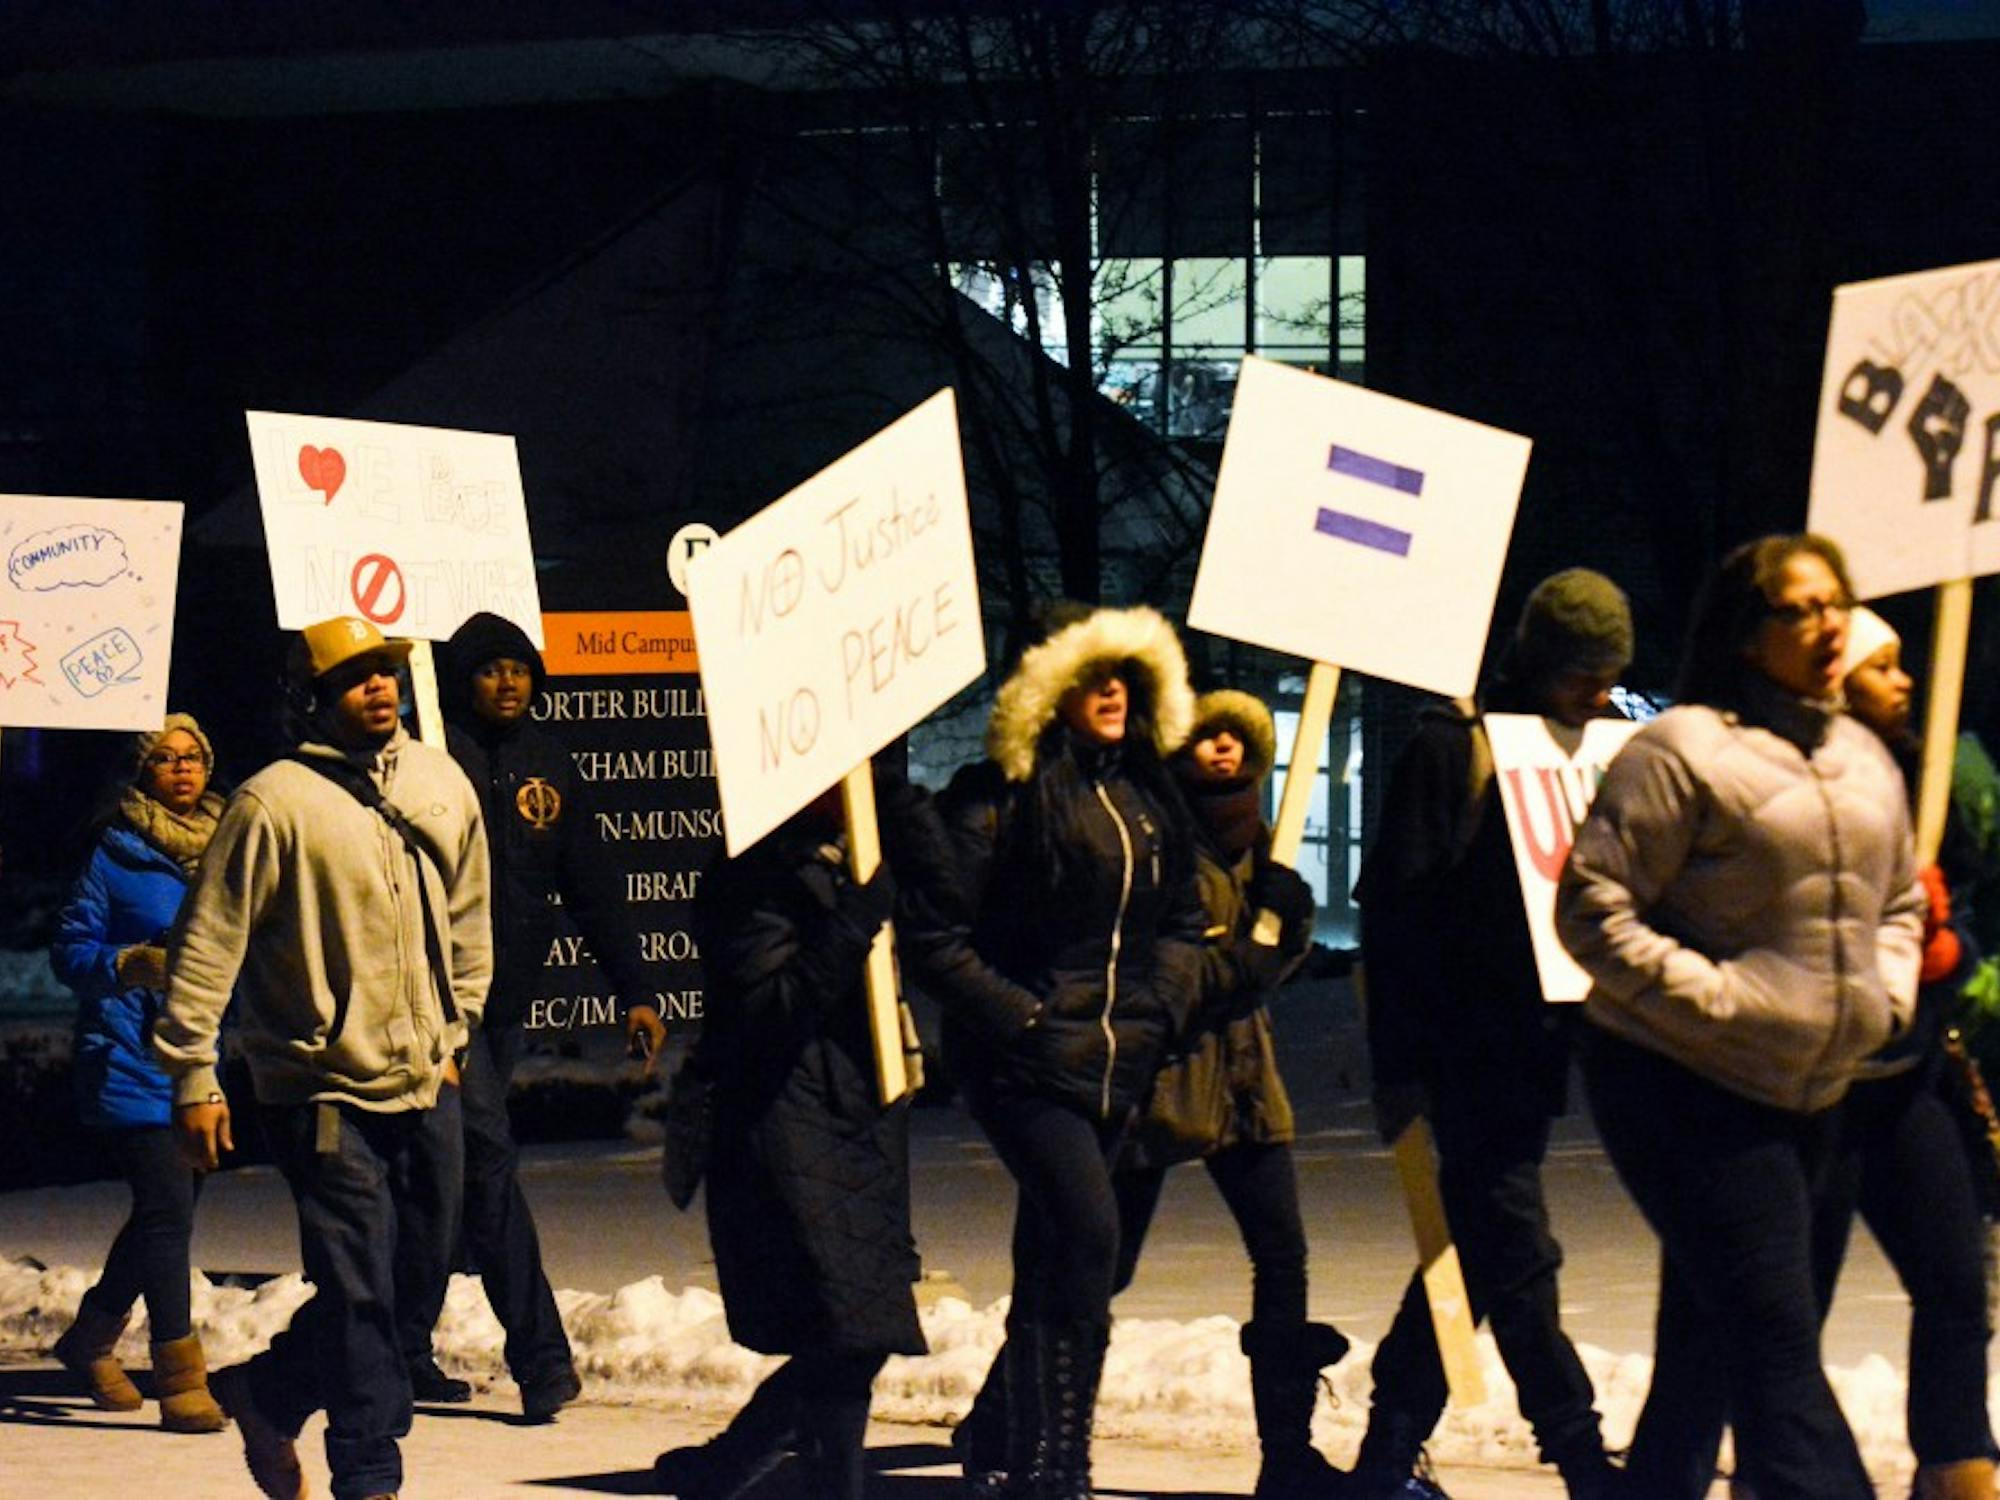 EMU students walk to important historic sites during the Martin Luter King Commemorative March on Jan 15, 2015 on Eastern Michigan University's campus.